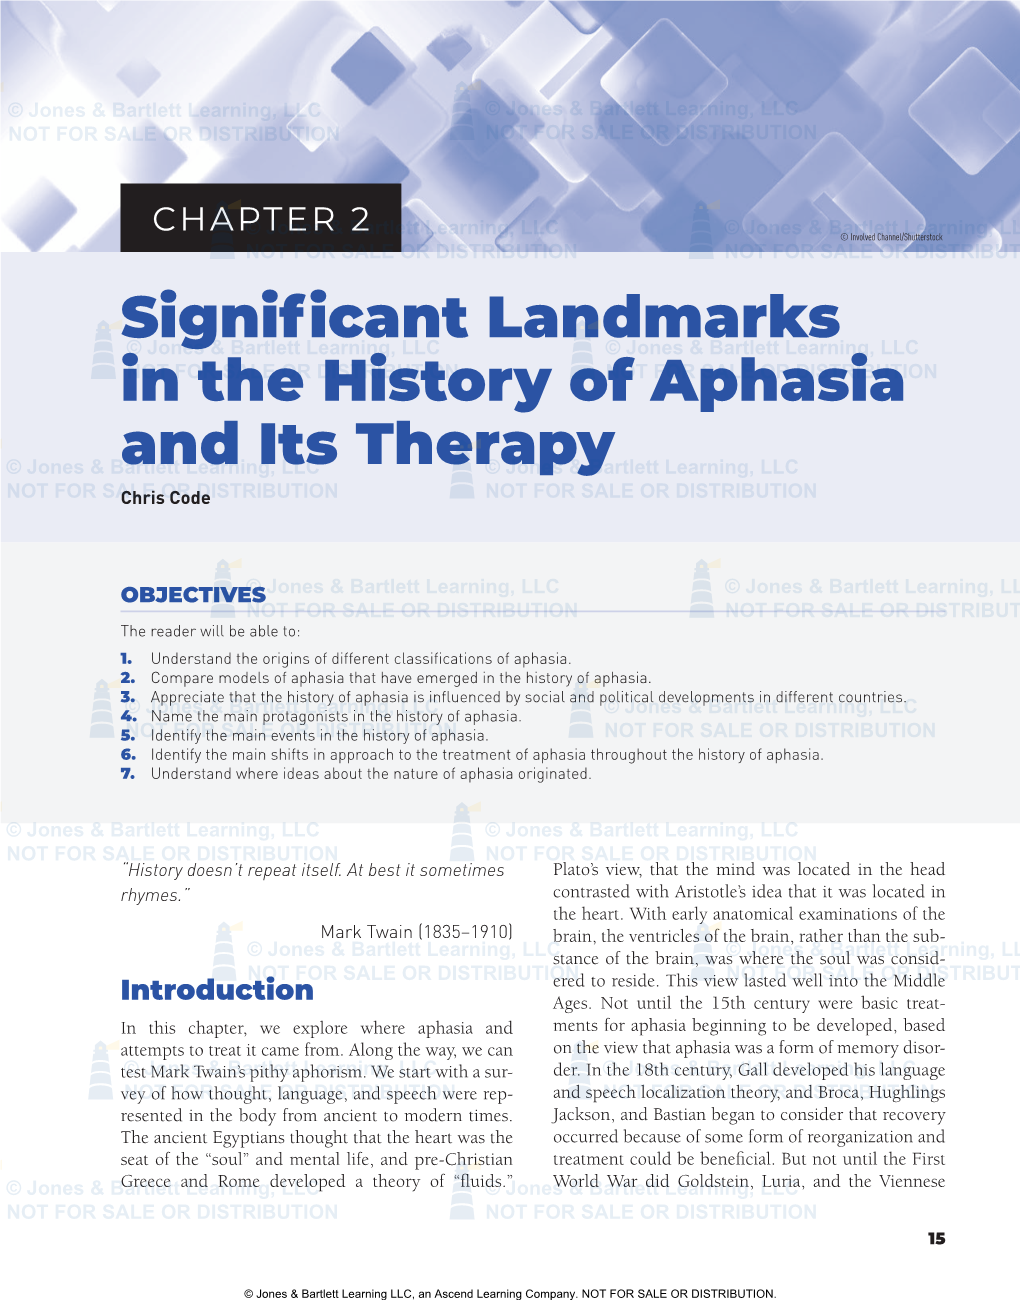 Significant Landmarks in the History of Aphasia and Its Therapy